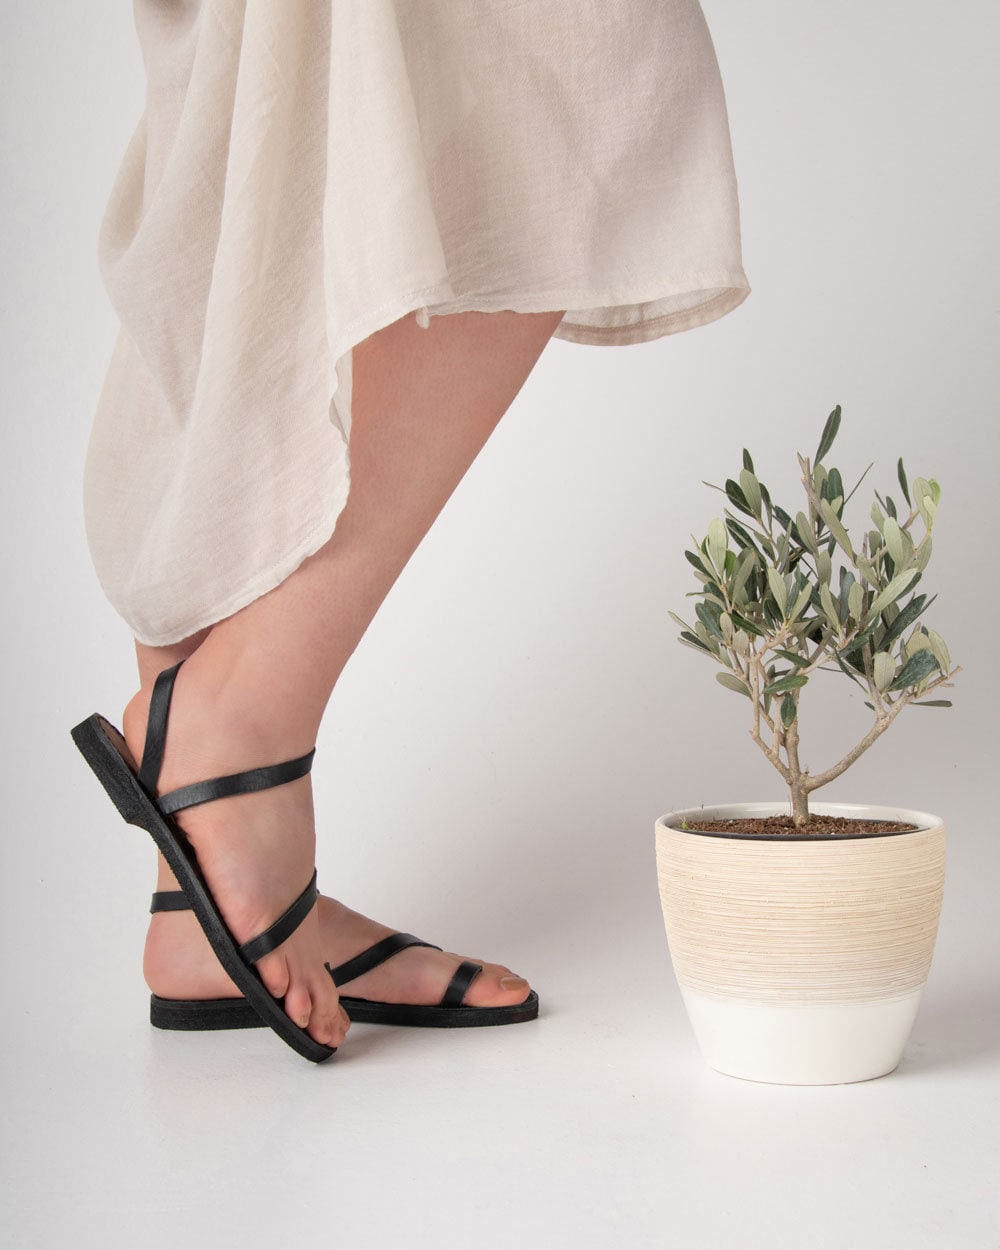 Strappy toe ring women sandals, open toe ankle strap Greek sandals, barefoot handmade leather black sandals